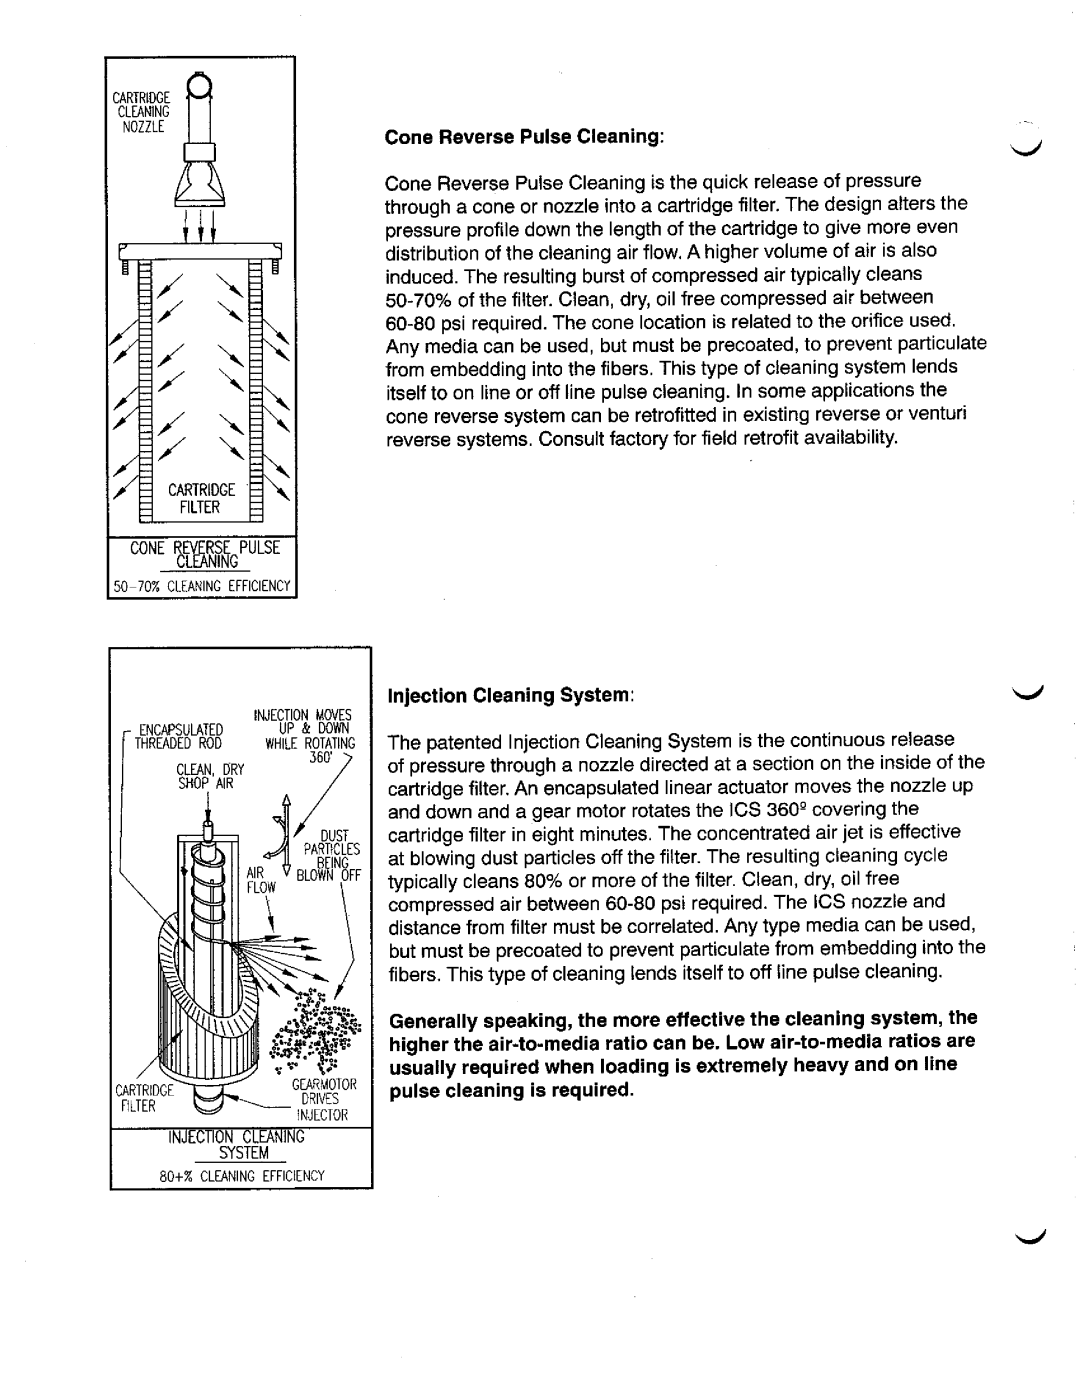 Trion Cartridge Cleaning Systems manual 